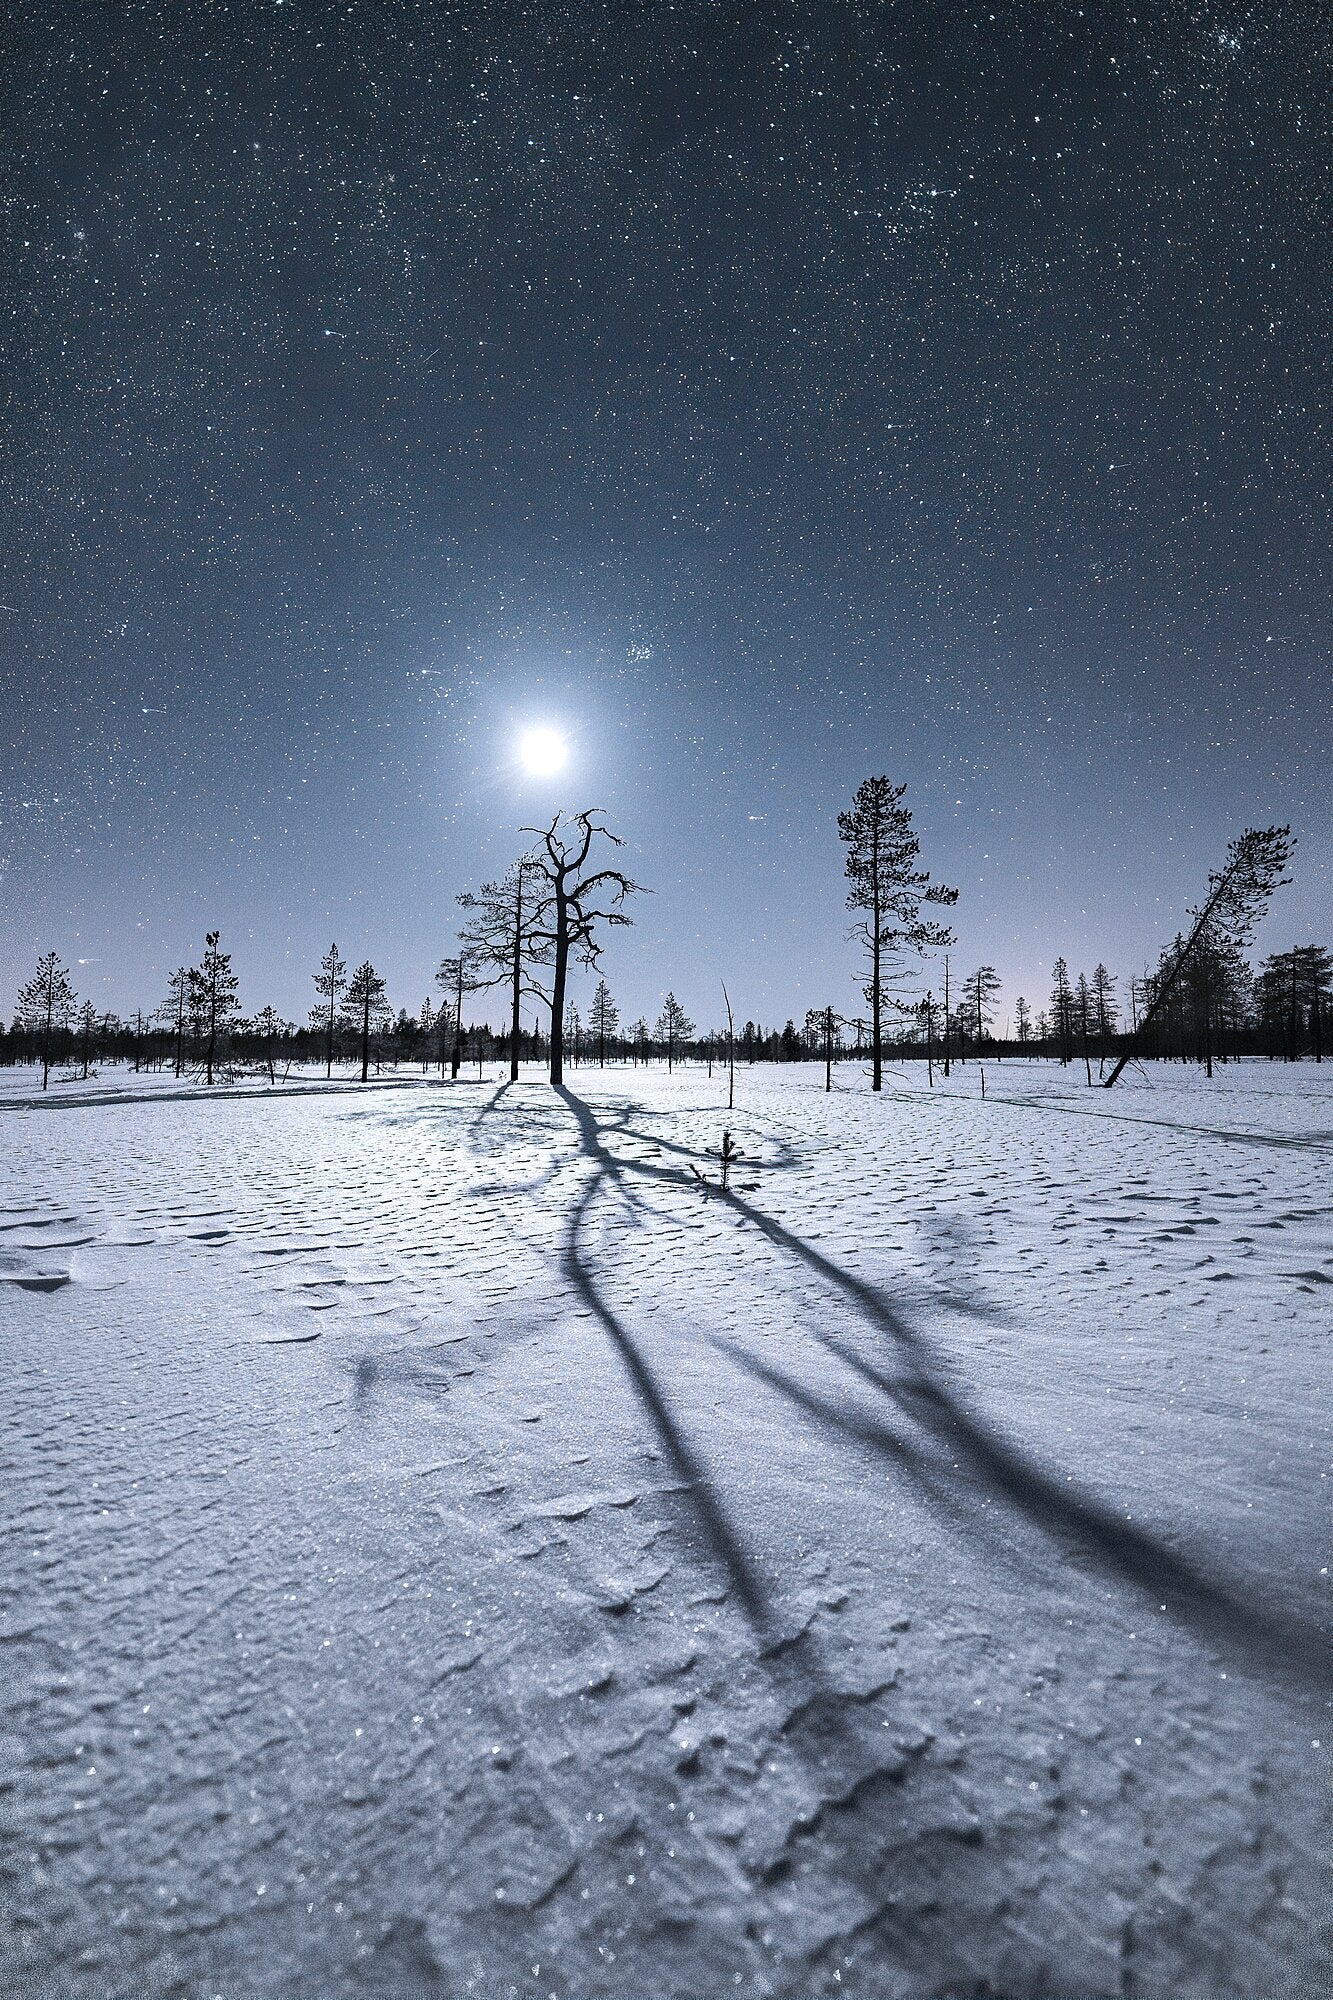 Magical winter night in northern marshy forest, crescent moon, wavy snow patterns, starry sky.